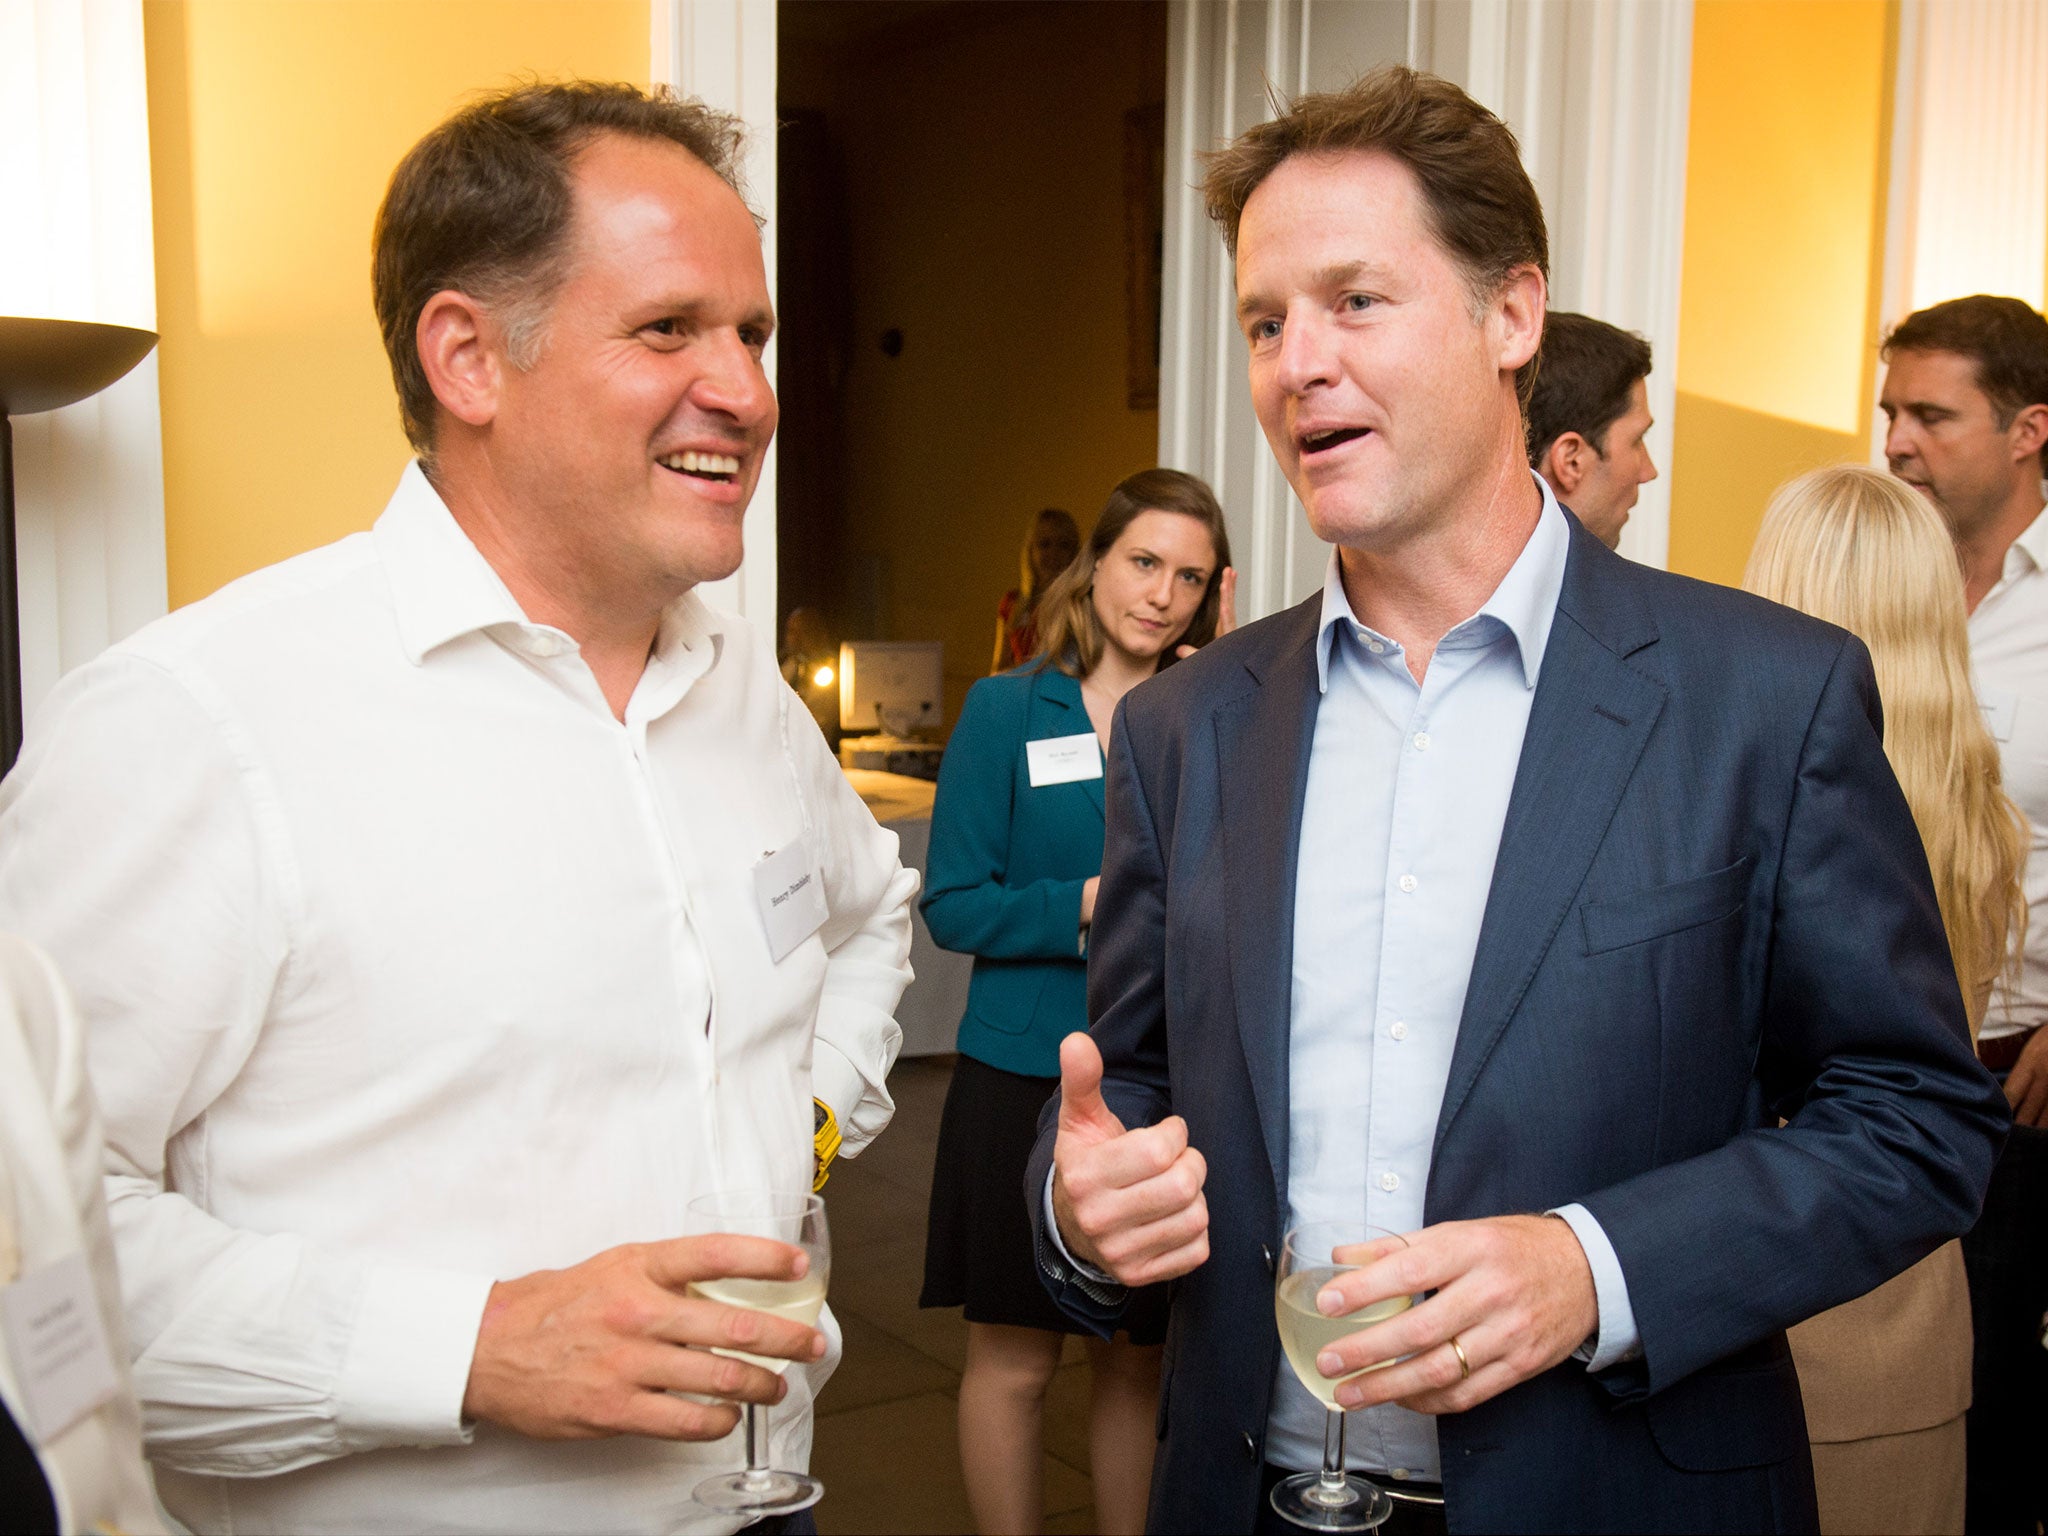 Deputy Prime Minister Nick Clegg launched the free school meals campaign with co-author Henry Dimbleby in 2014